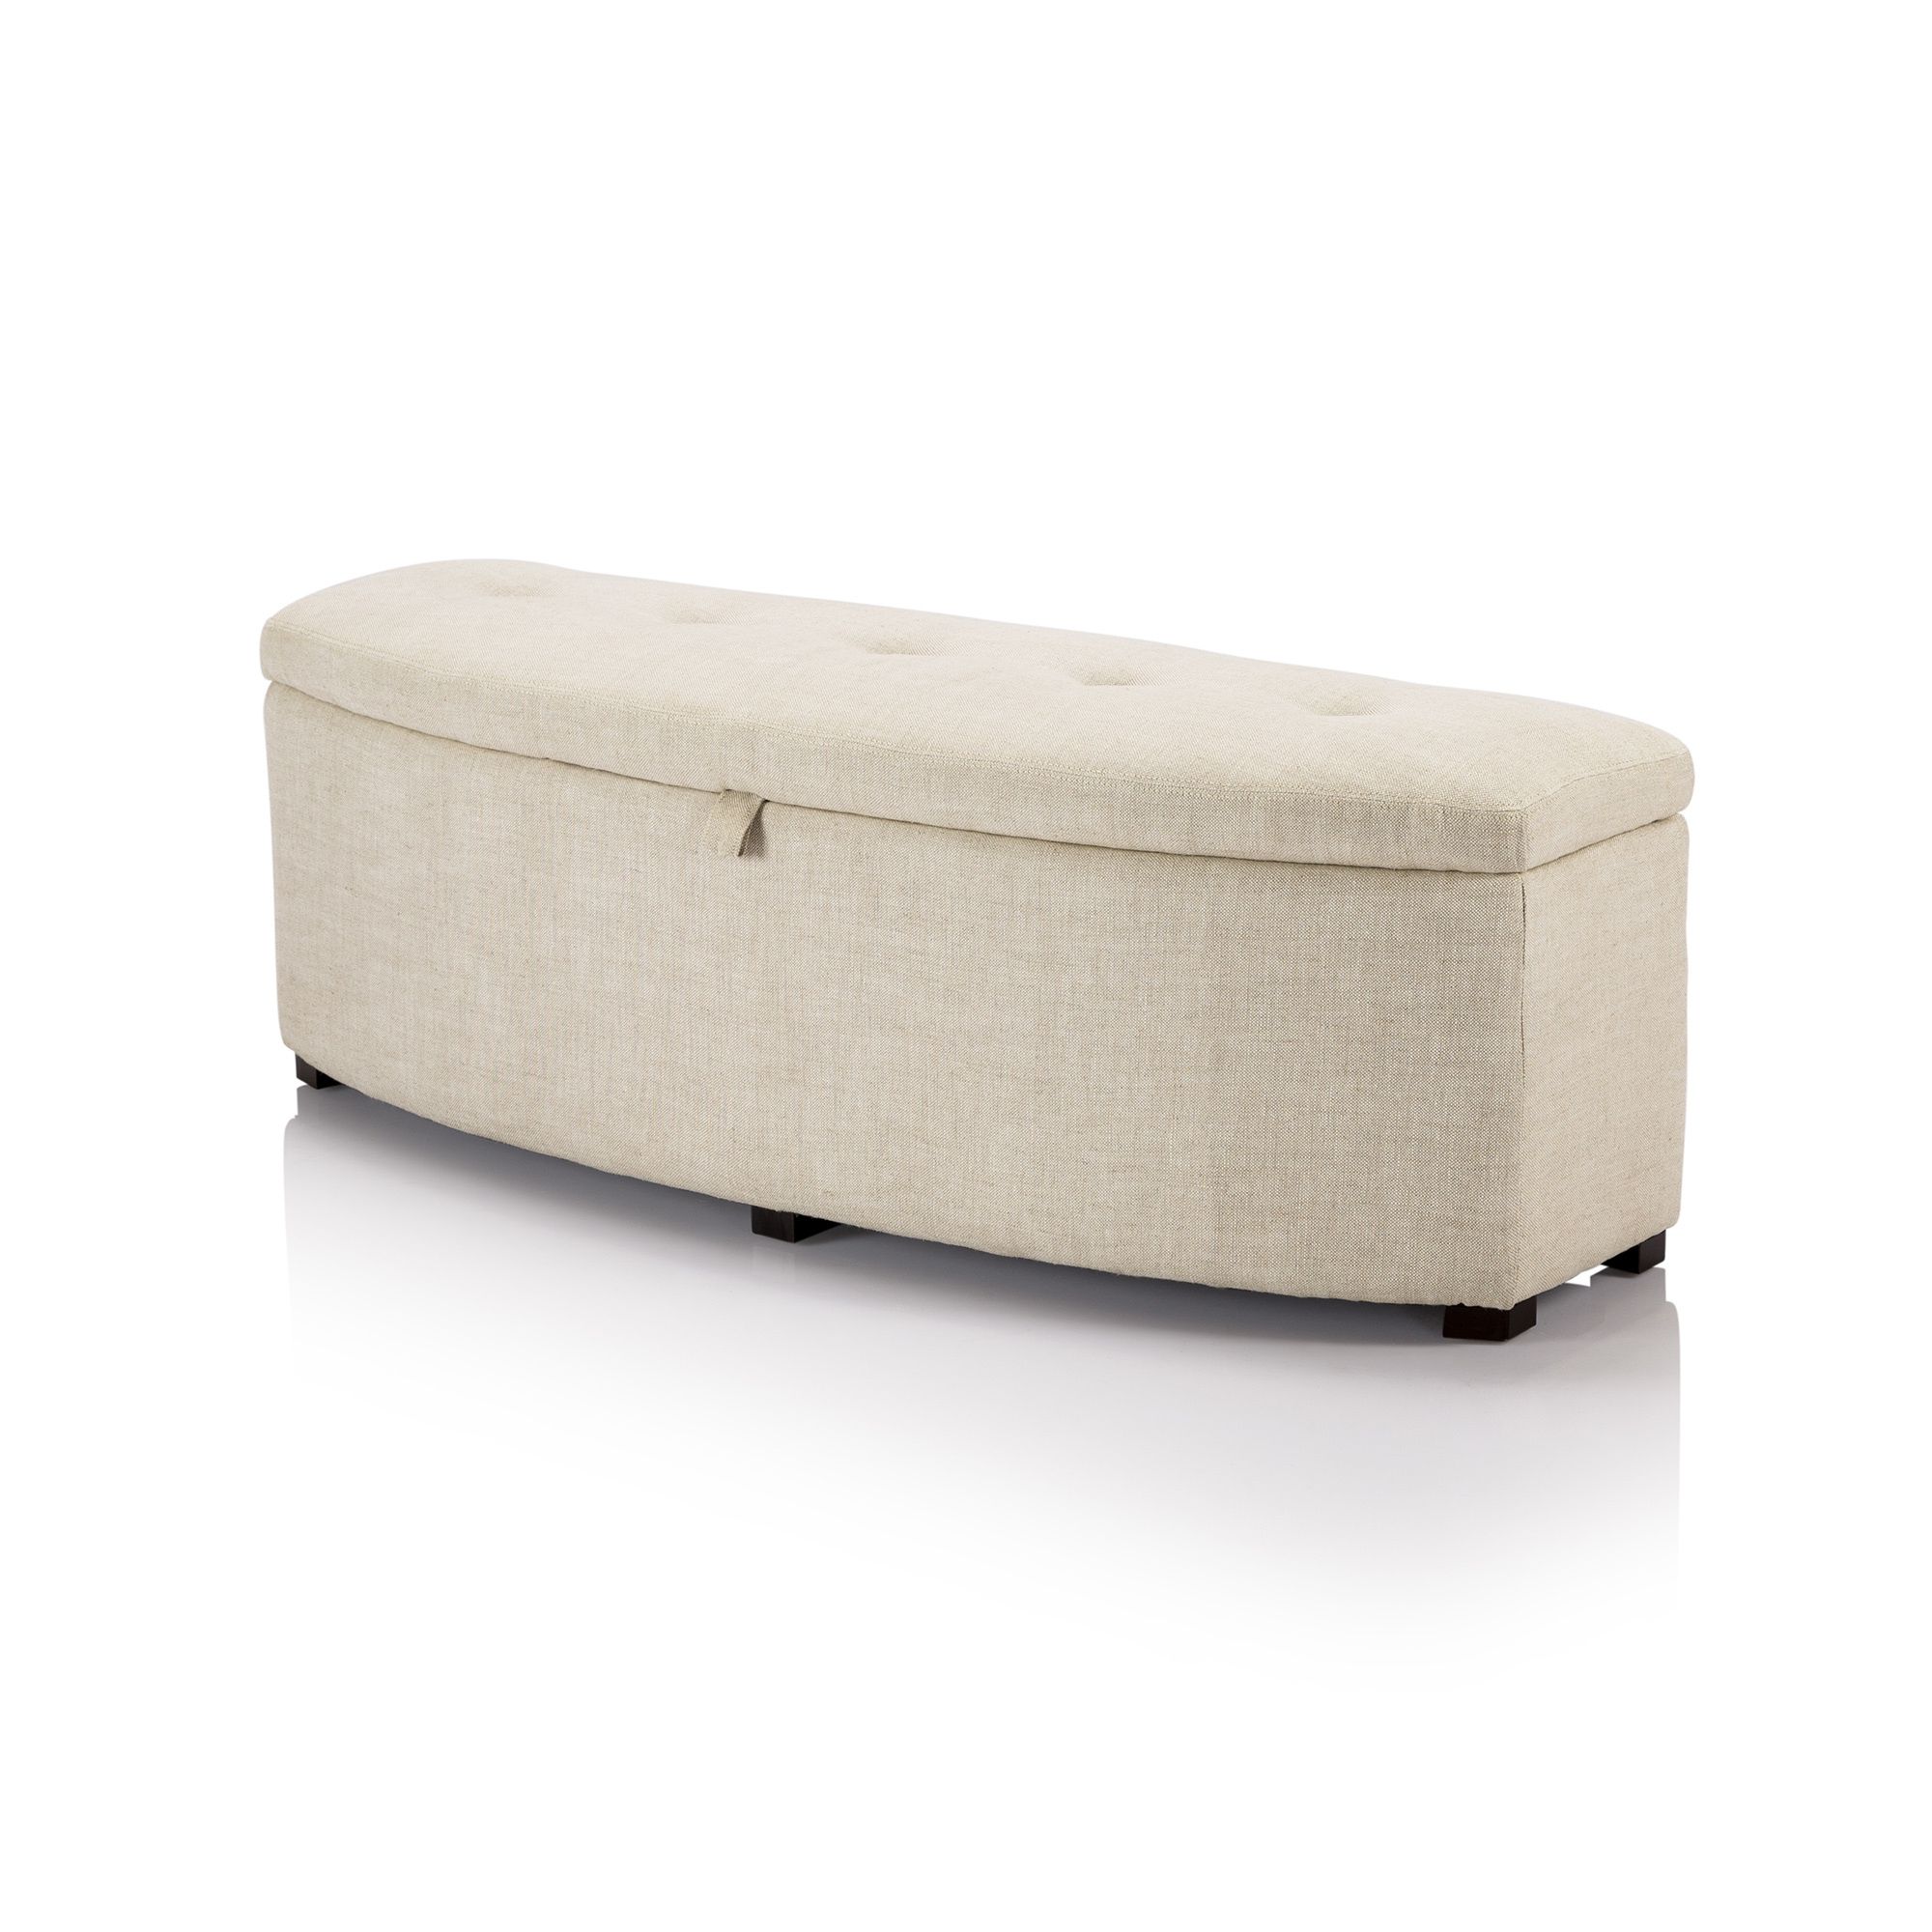 Coco Republic Throughout Well Known Coconut Ottomans (View 6 of 15)